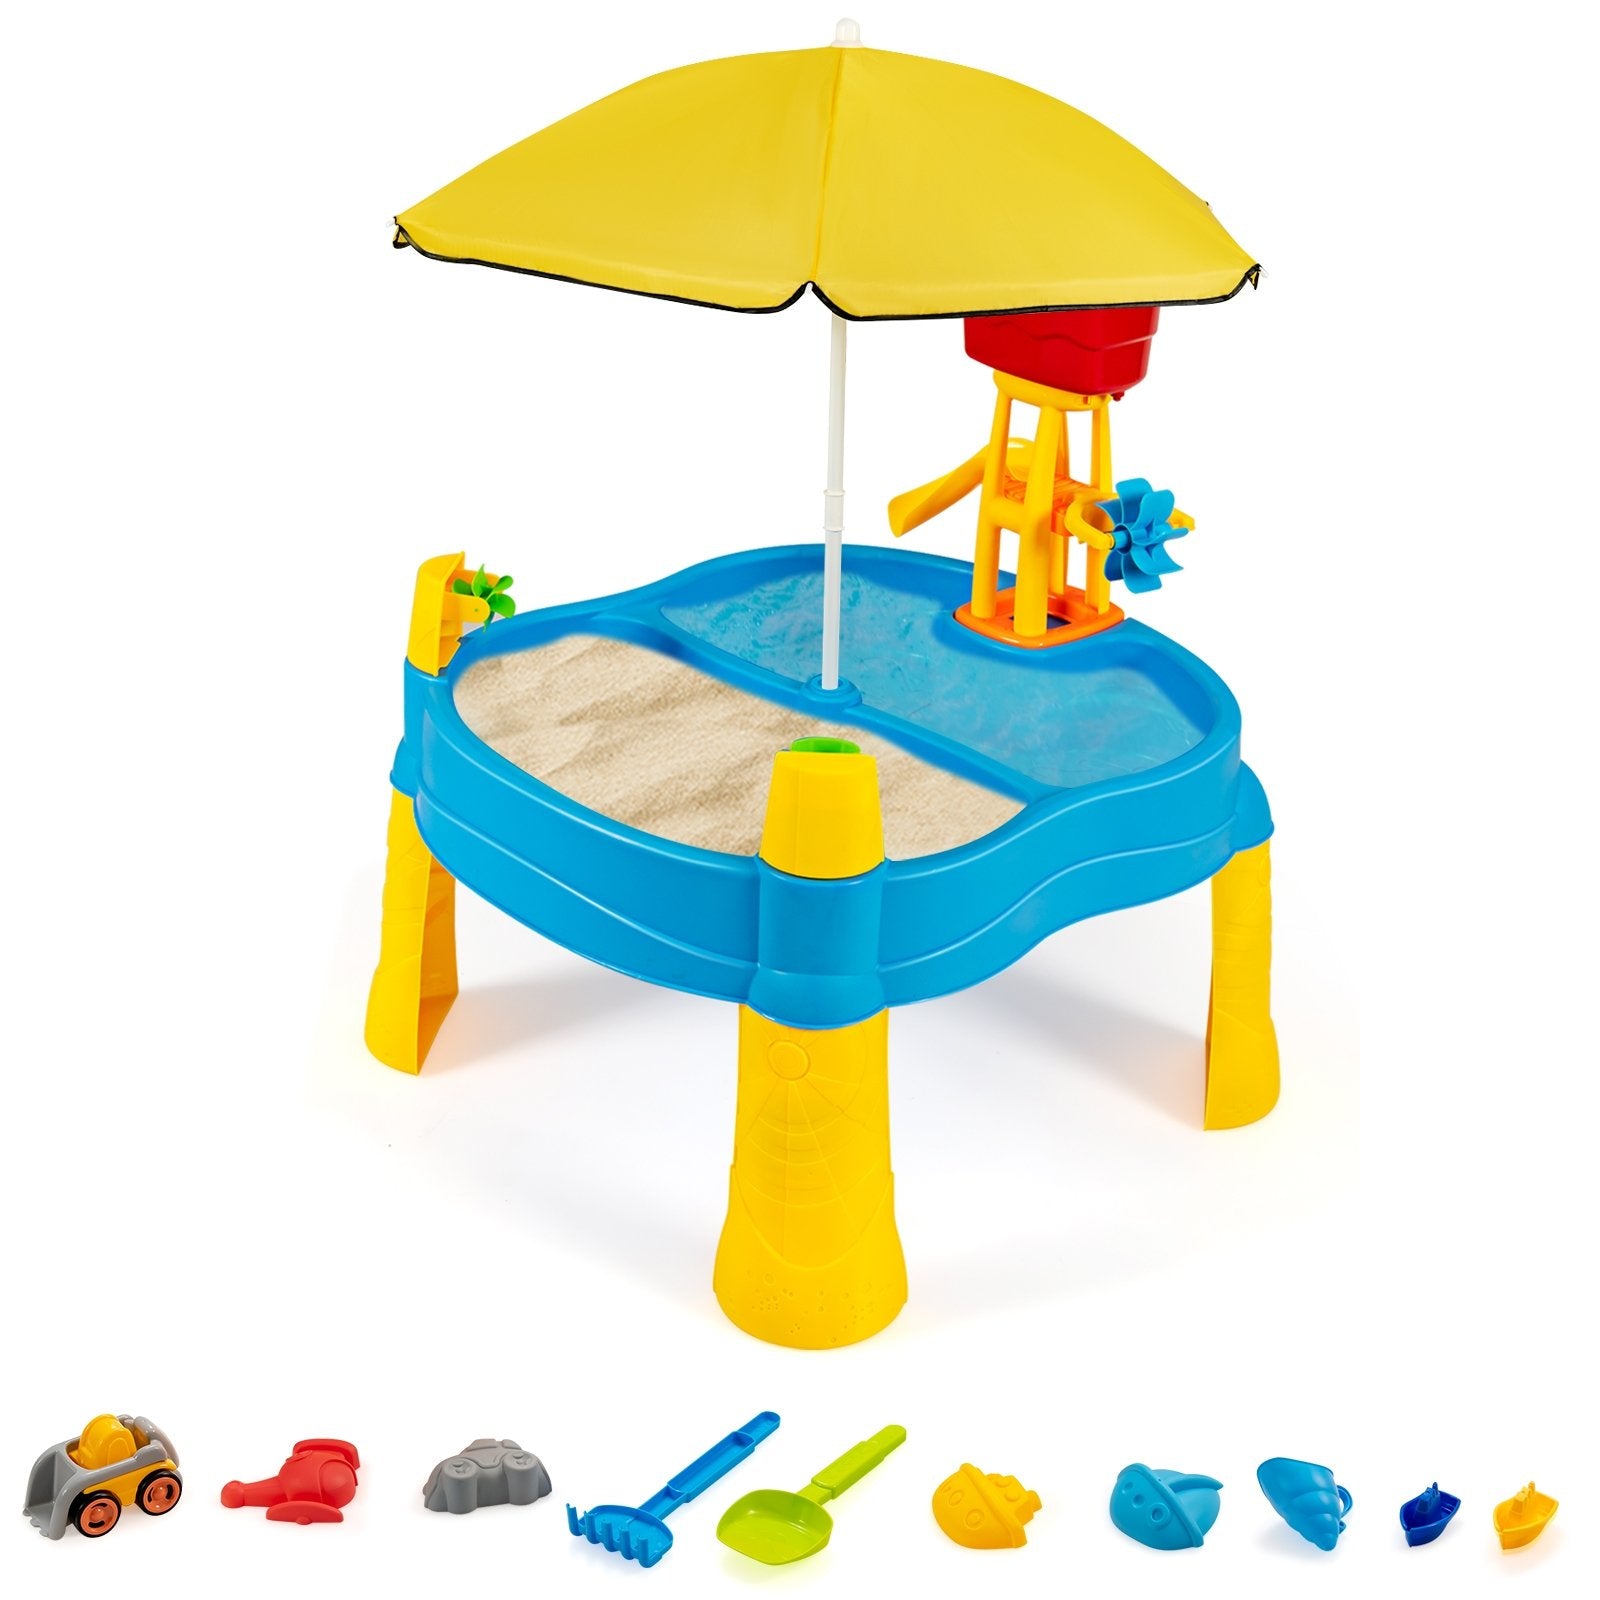 Kids Sand and Water Table for Toddlers with Umbrella and 18 Pieces Accessory Set, Multicolor - Gallery Canada